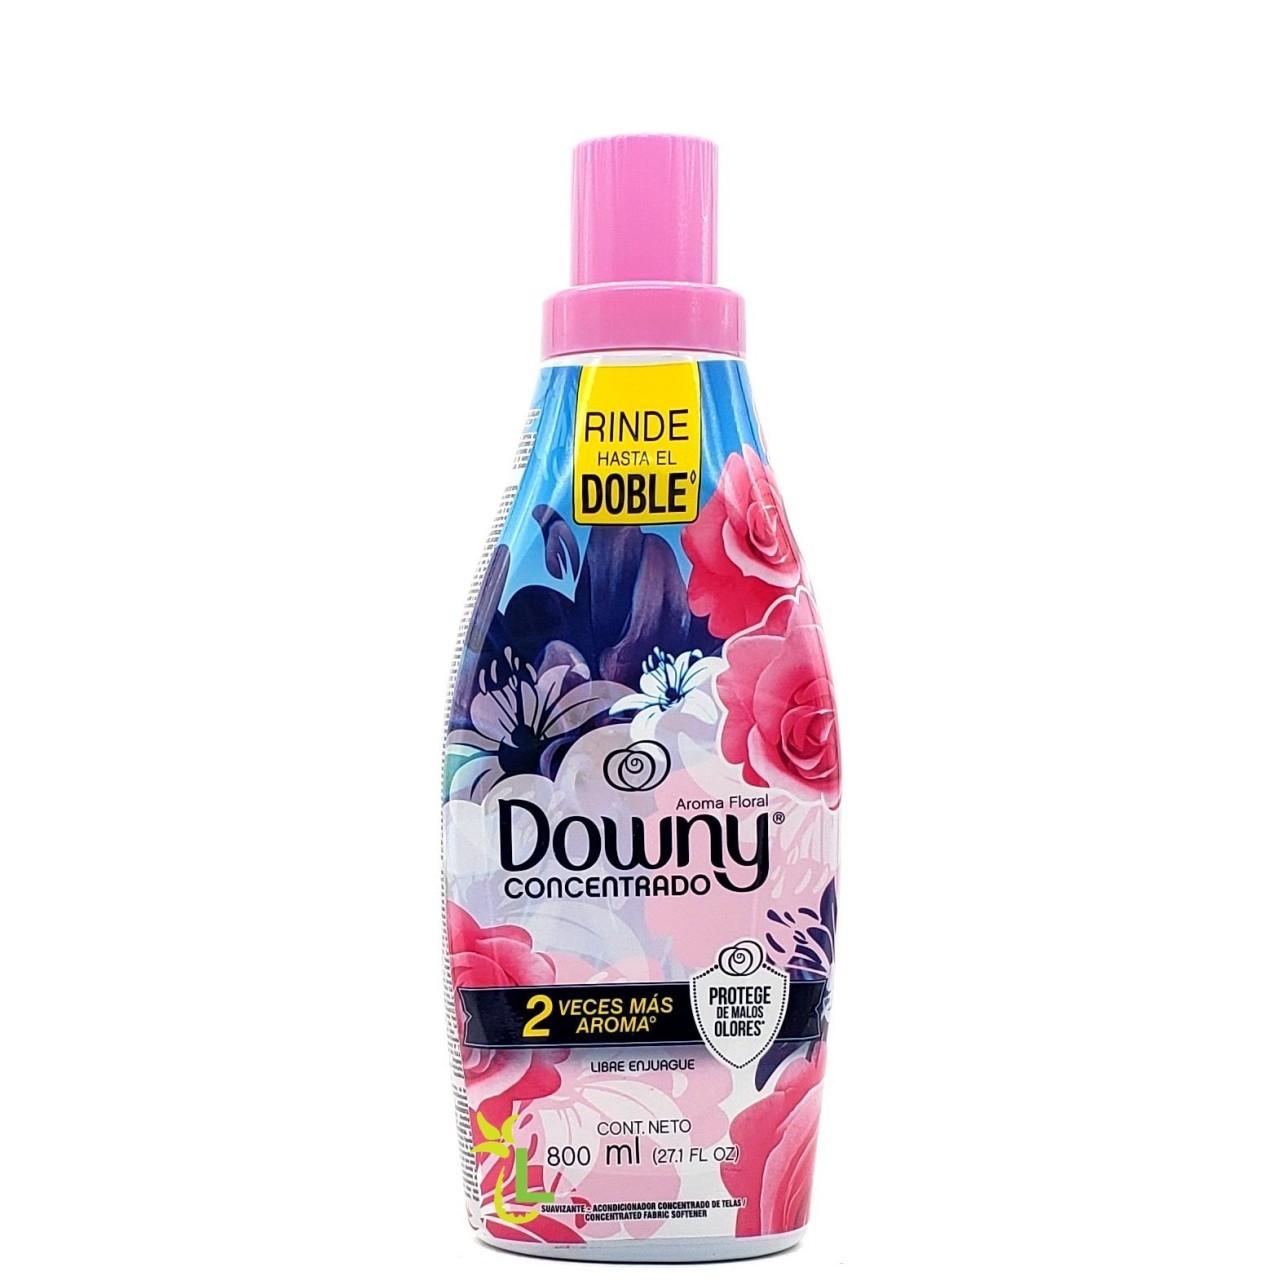 DOWNY AROMA FLORAL 800ml